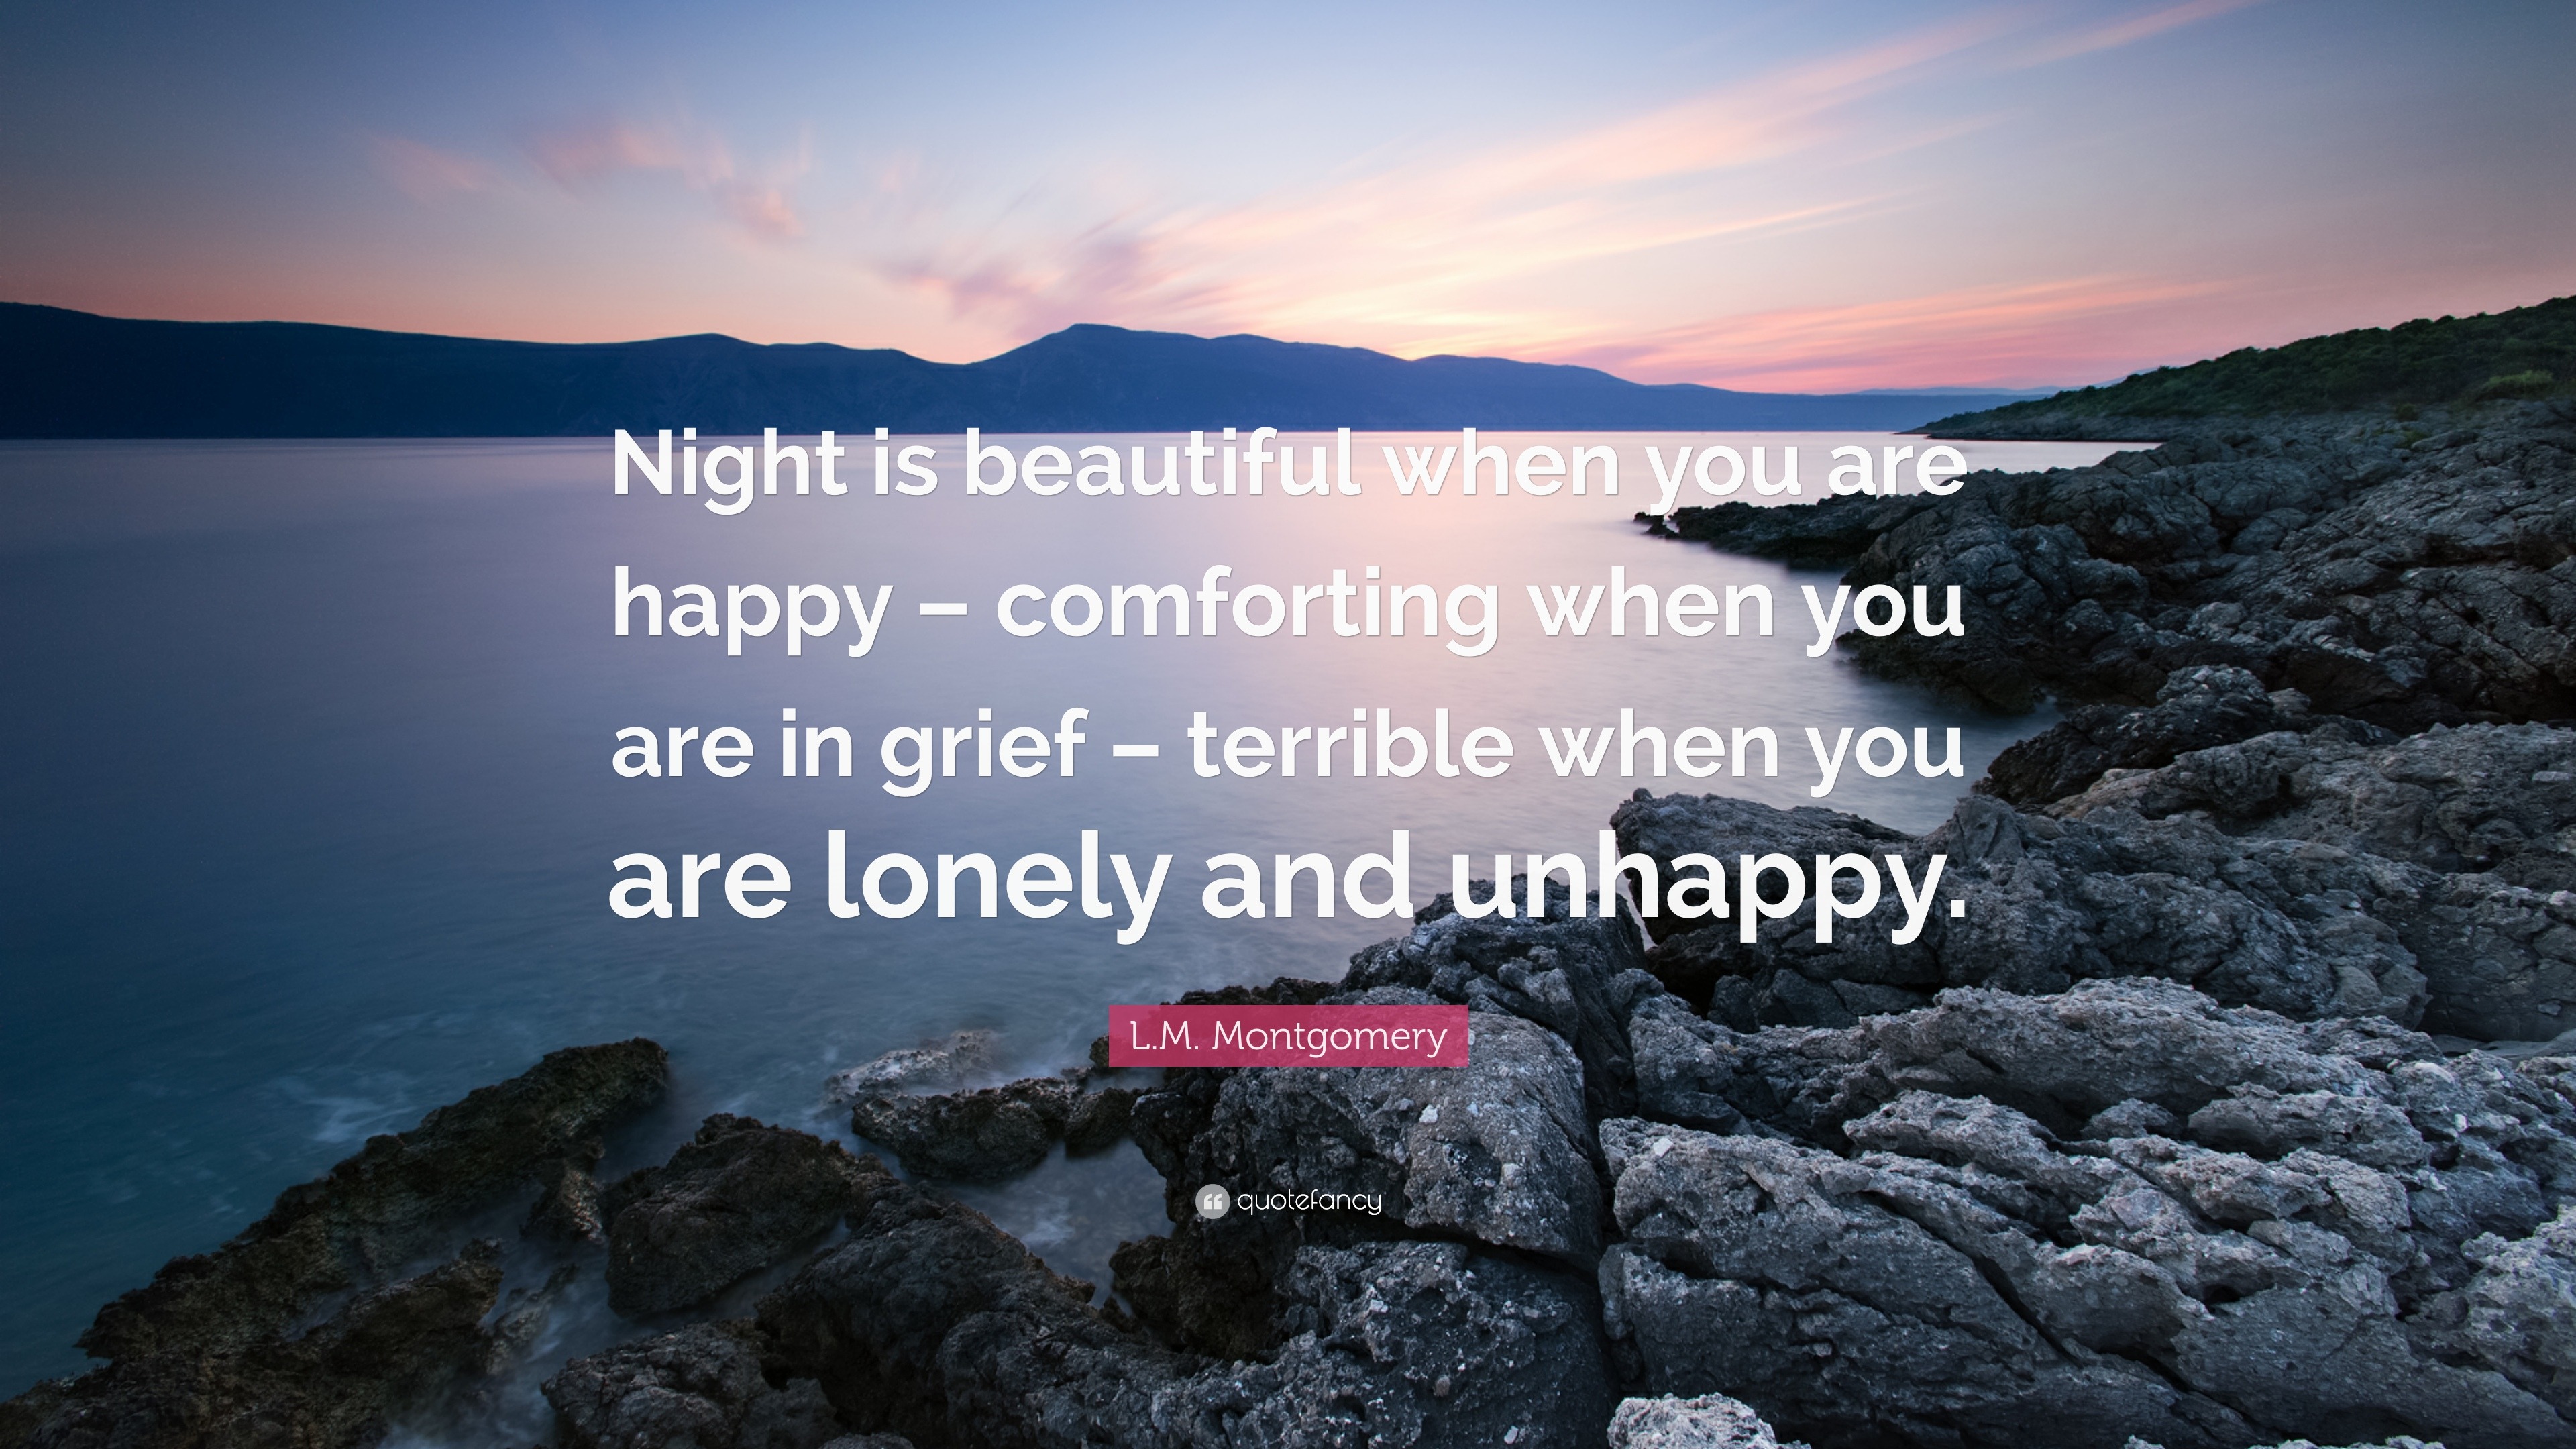 L M Montgomery Quote “Night is beautiful when you are happy – forting when you